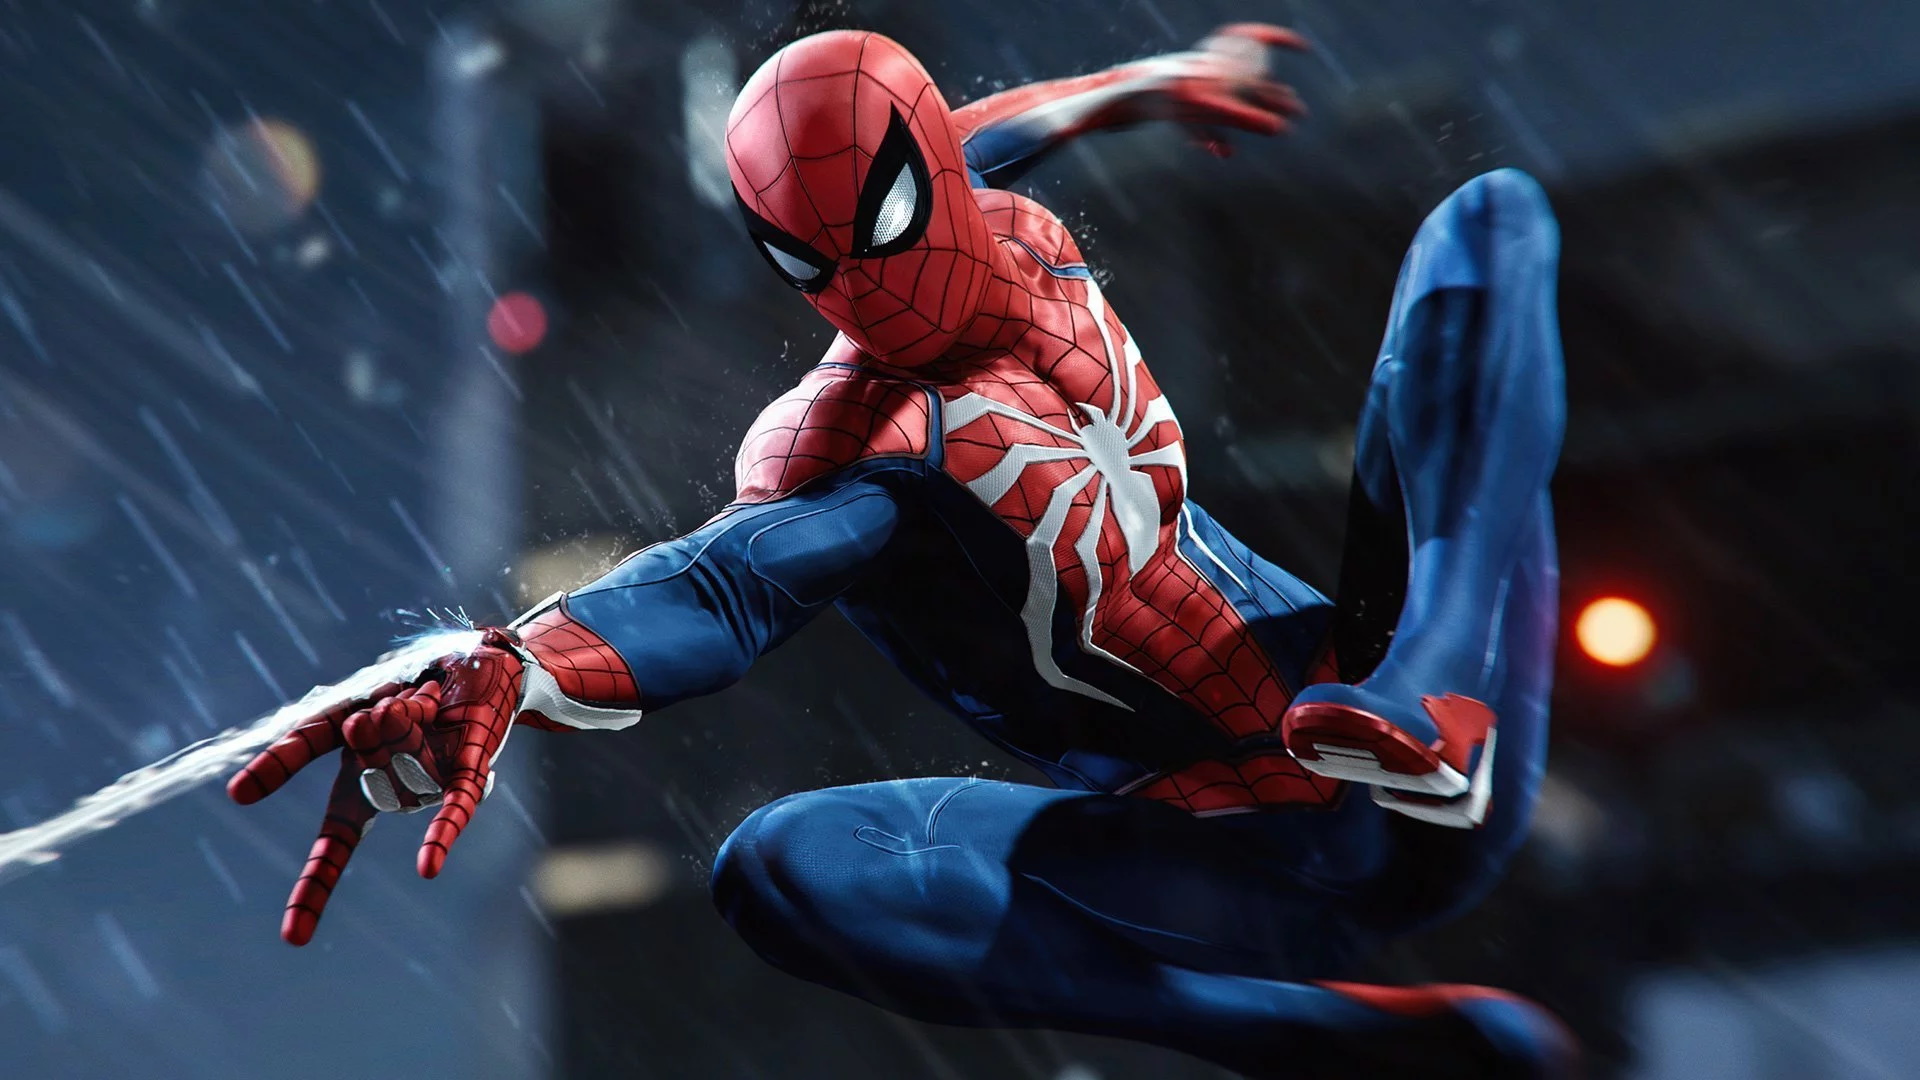 spider-man-remastered-on-ps5-won’t-be-offered-as-standalone-game.jpg